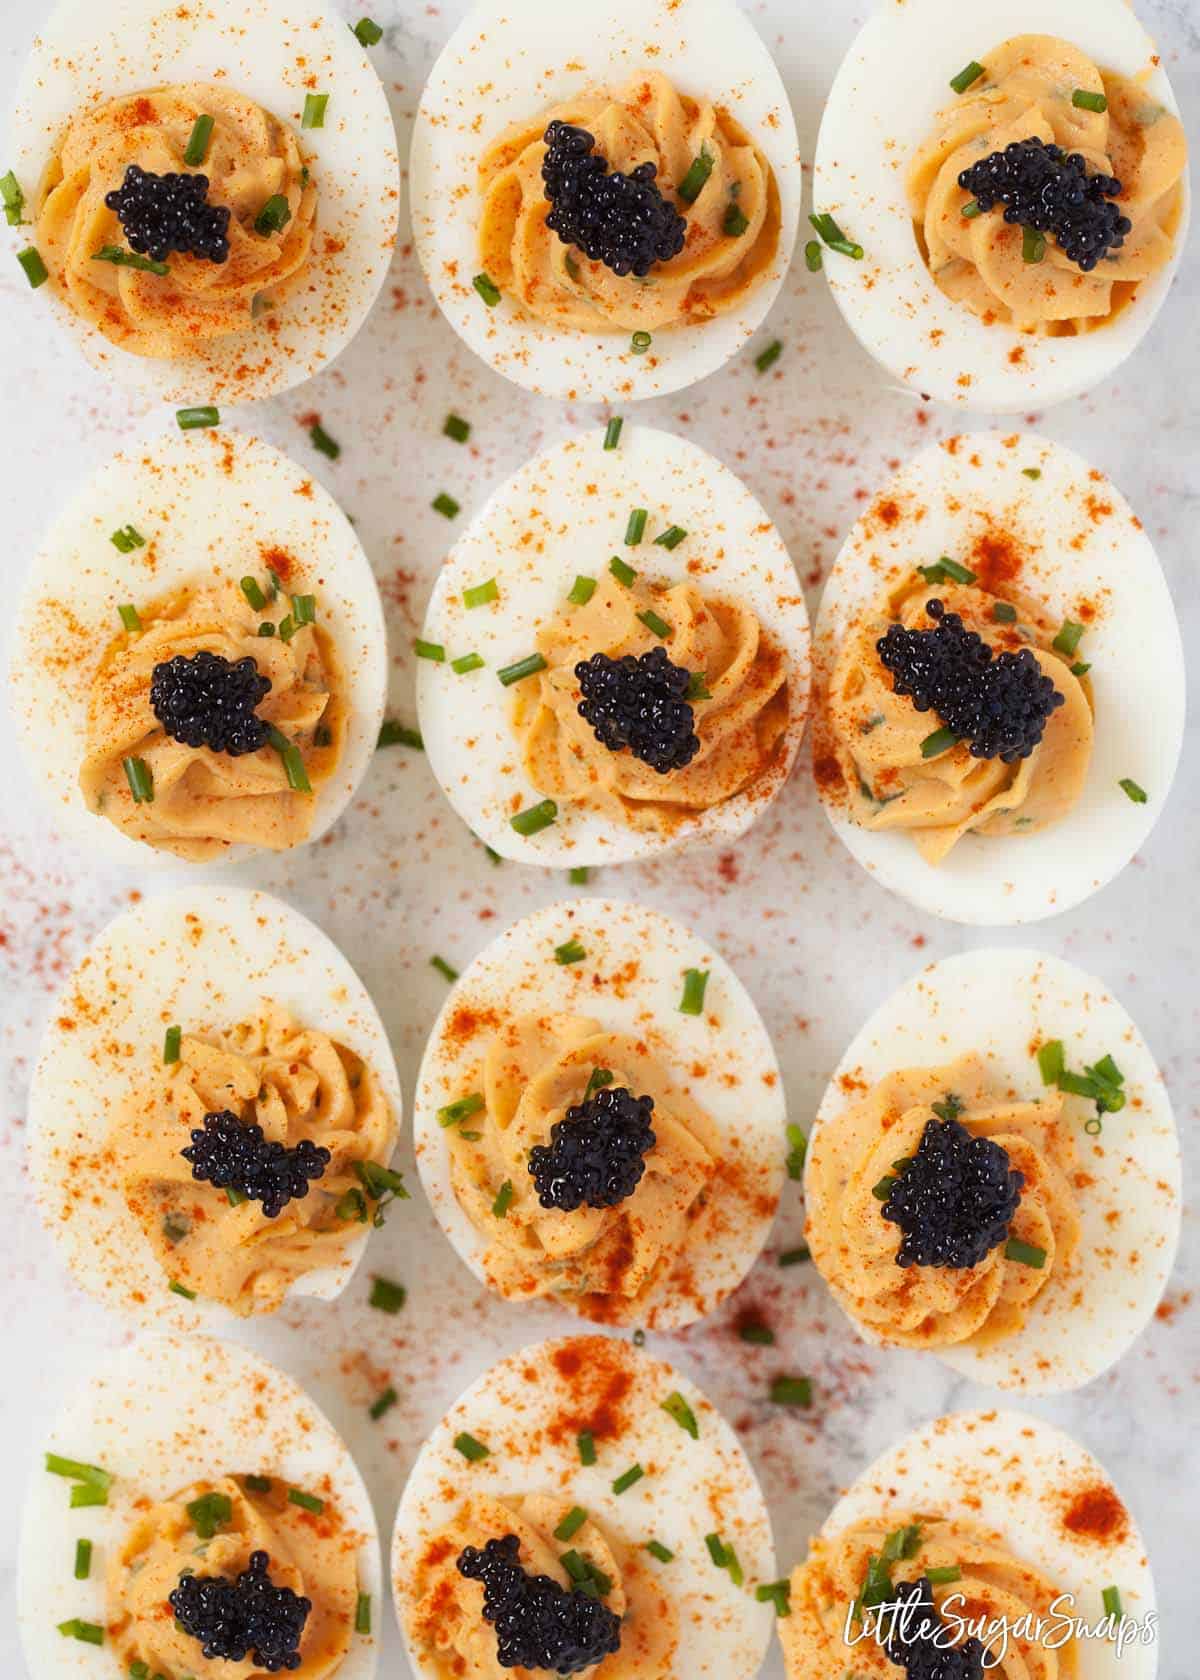 Devilled eggs topped with caviar, paprika and chives on a worktop